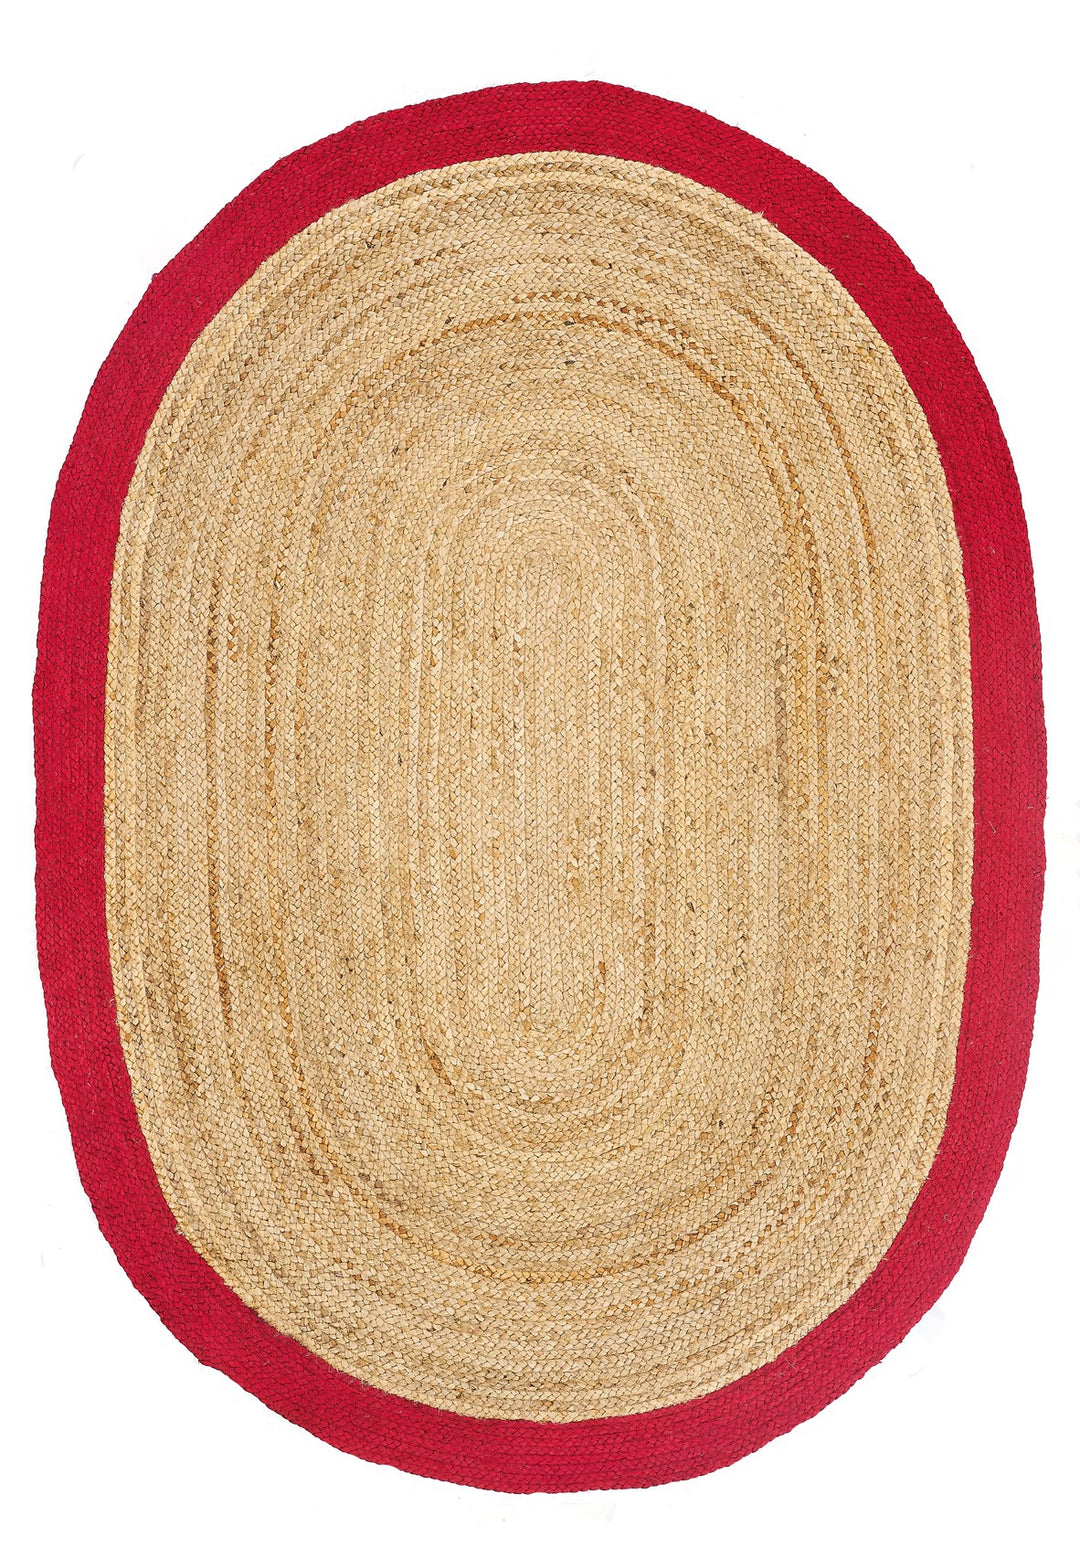 Dolce Vita Agra Red Oval Hand-Made Jute Rug